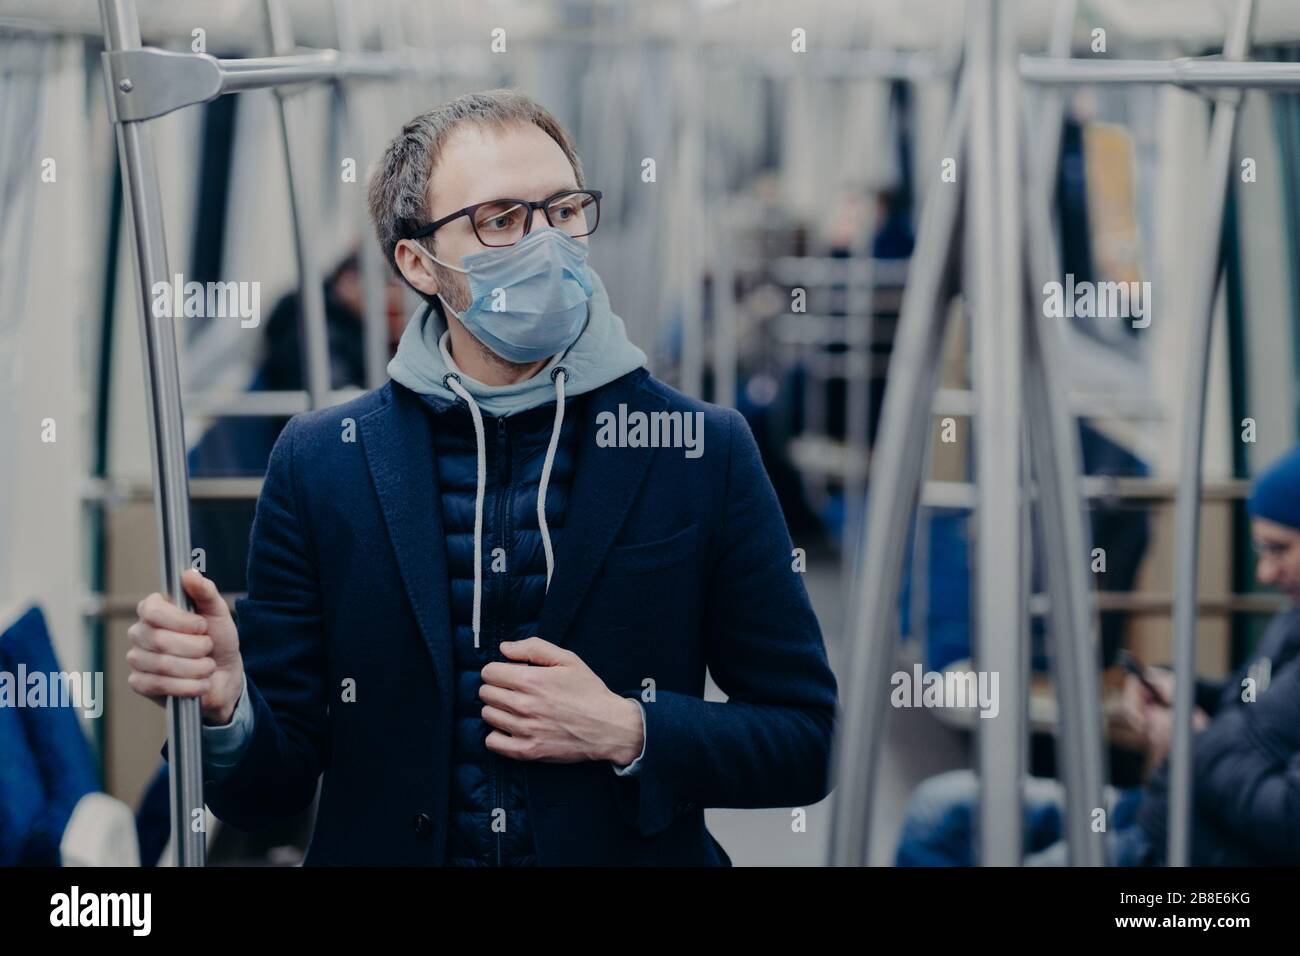 Pensive young man in eyewear wears protective surgical mask during coronavirus outbreak, poses in public transportation, thinks how to overcome diseas Stock Photo